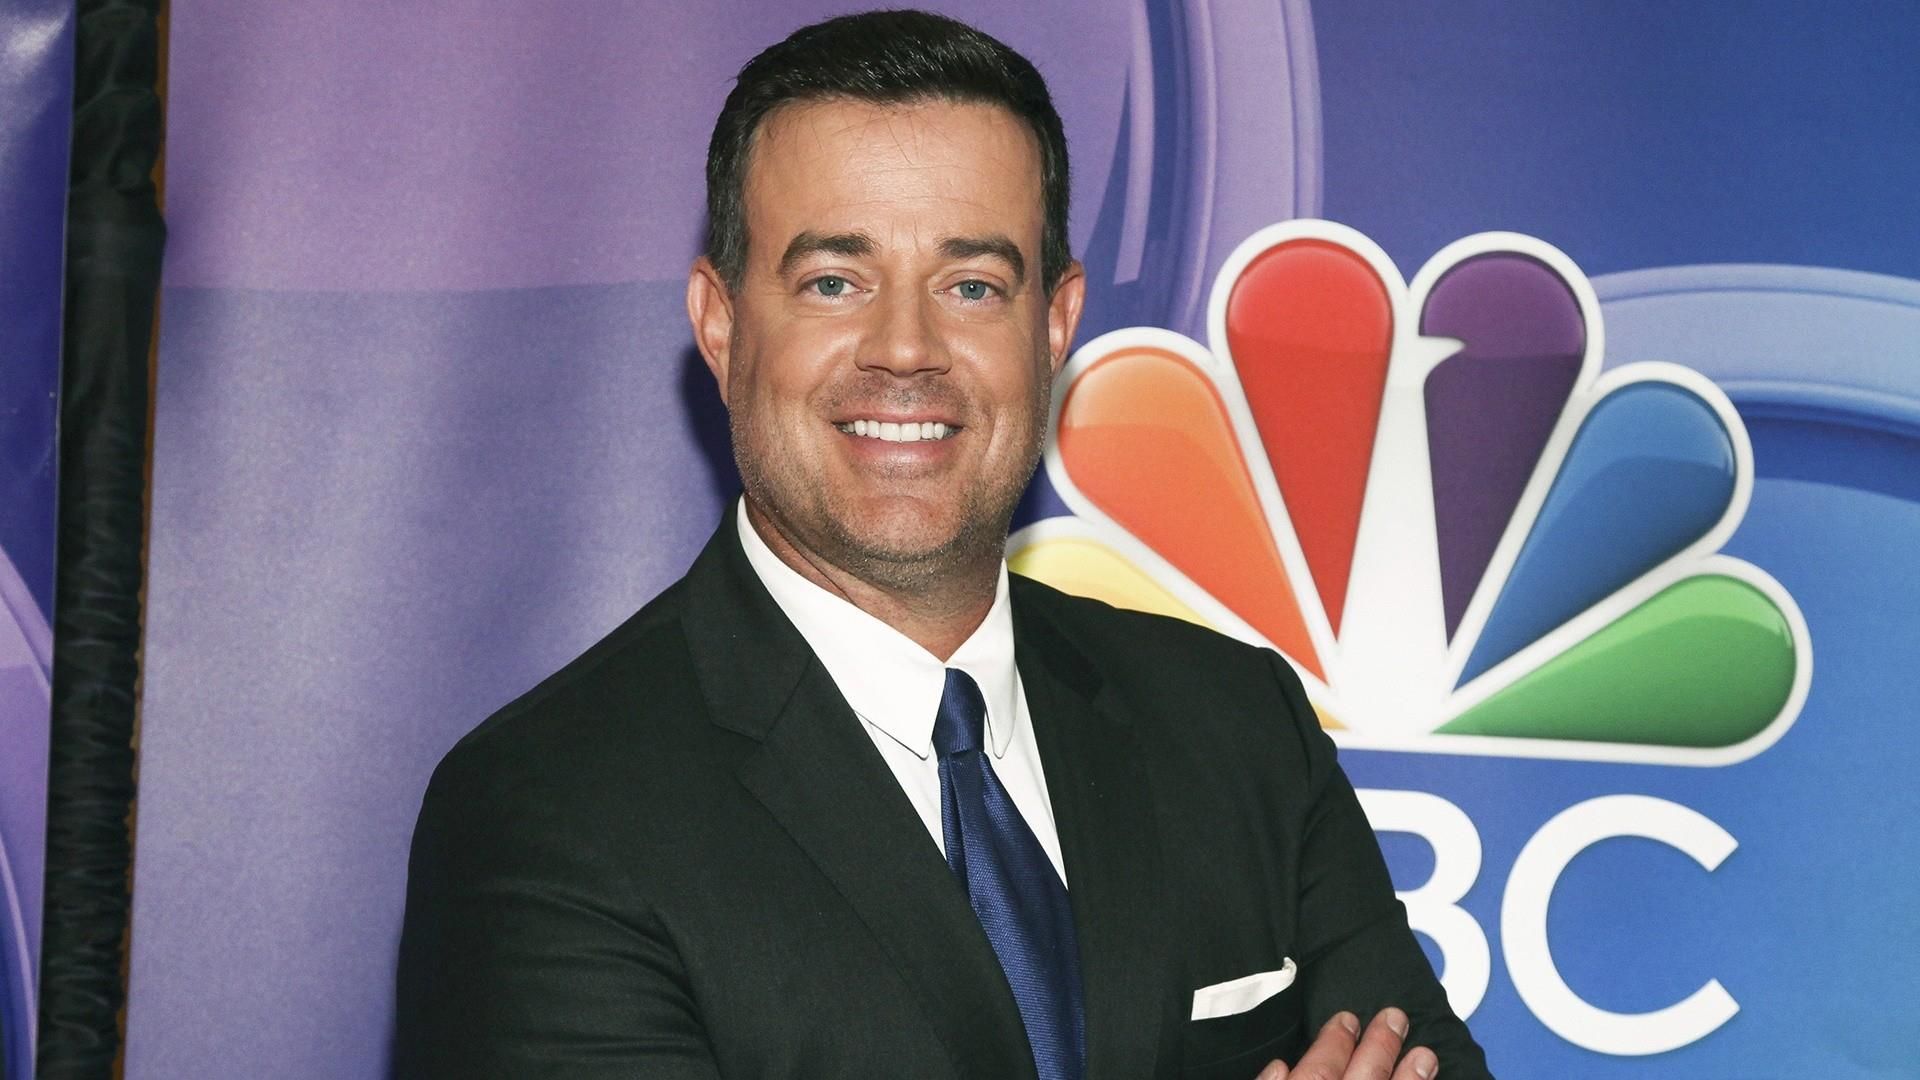 You Don't Have to Suffer in Silence: Carson Daly Opens Up to Maria about His Anxiety